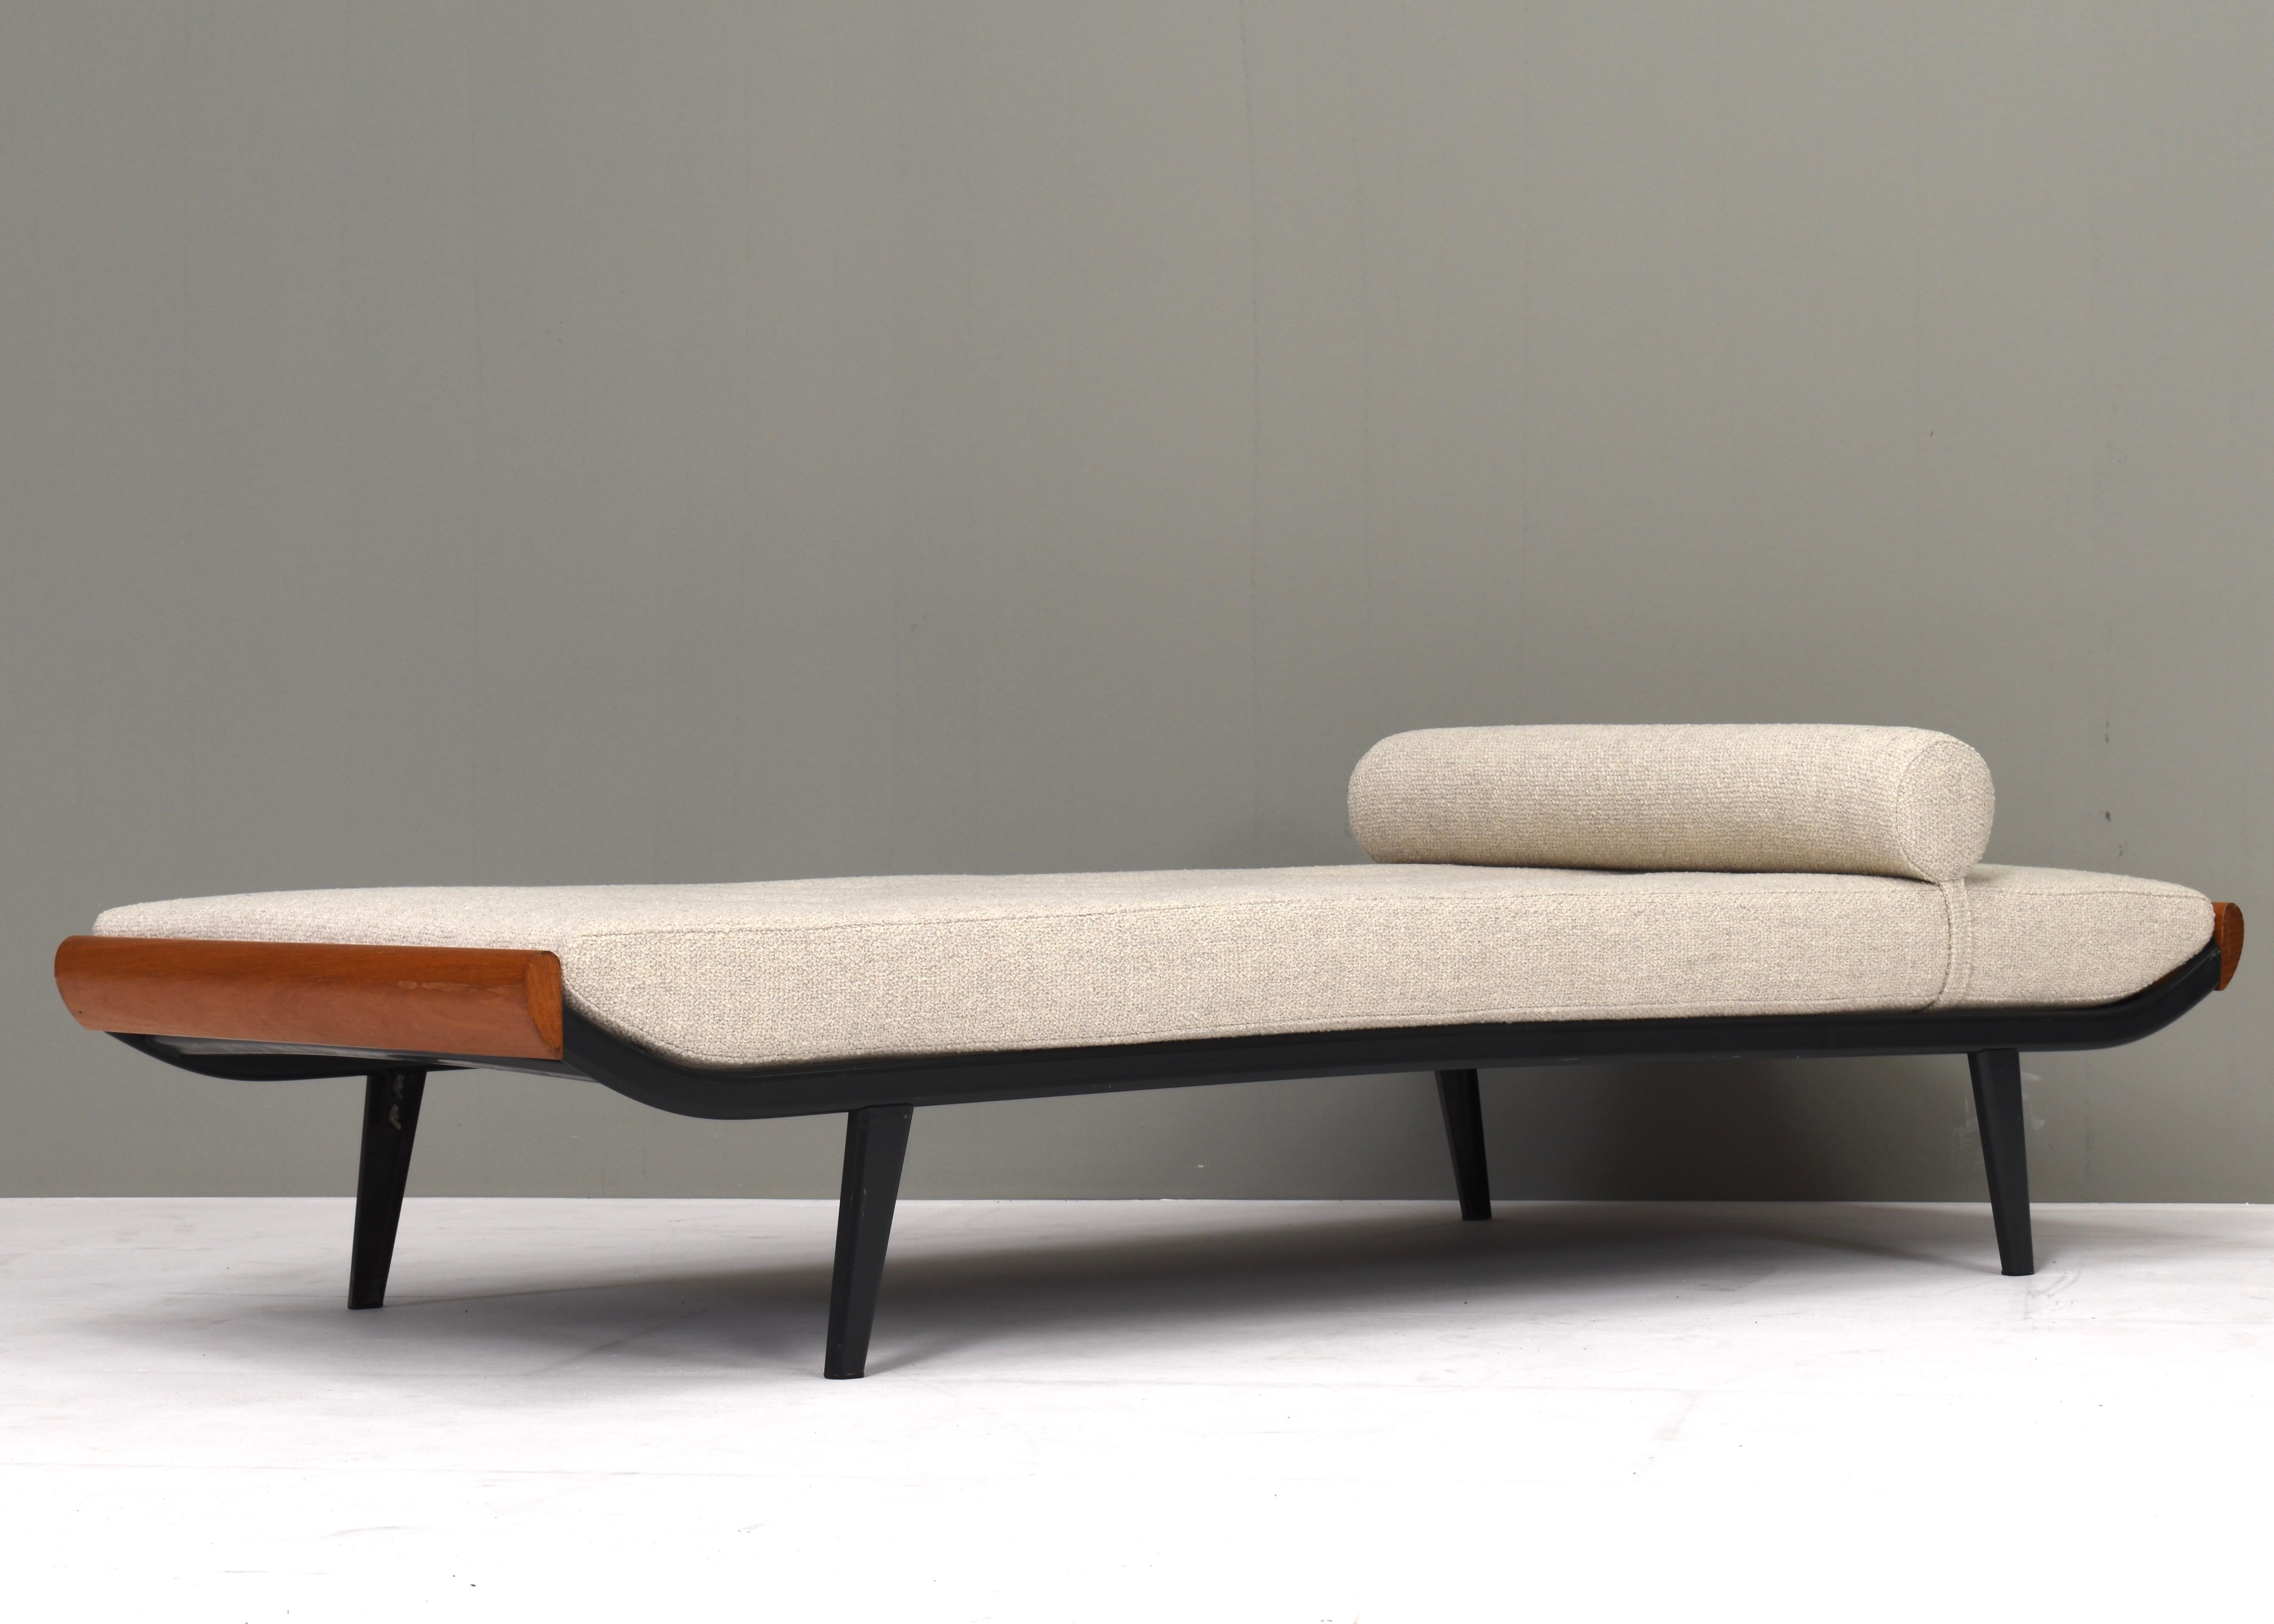 Mid-Century Modern Cleopatra Daybed by Cordemeijer for Auping, Netherlands, 1954